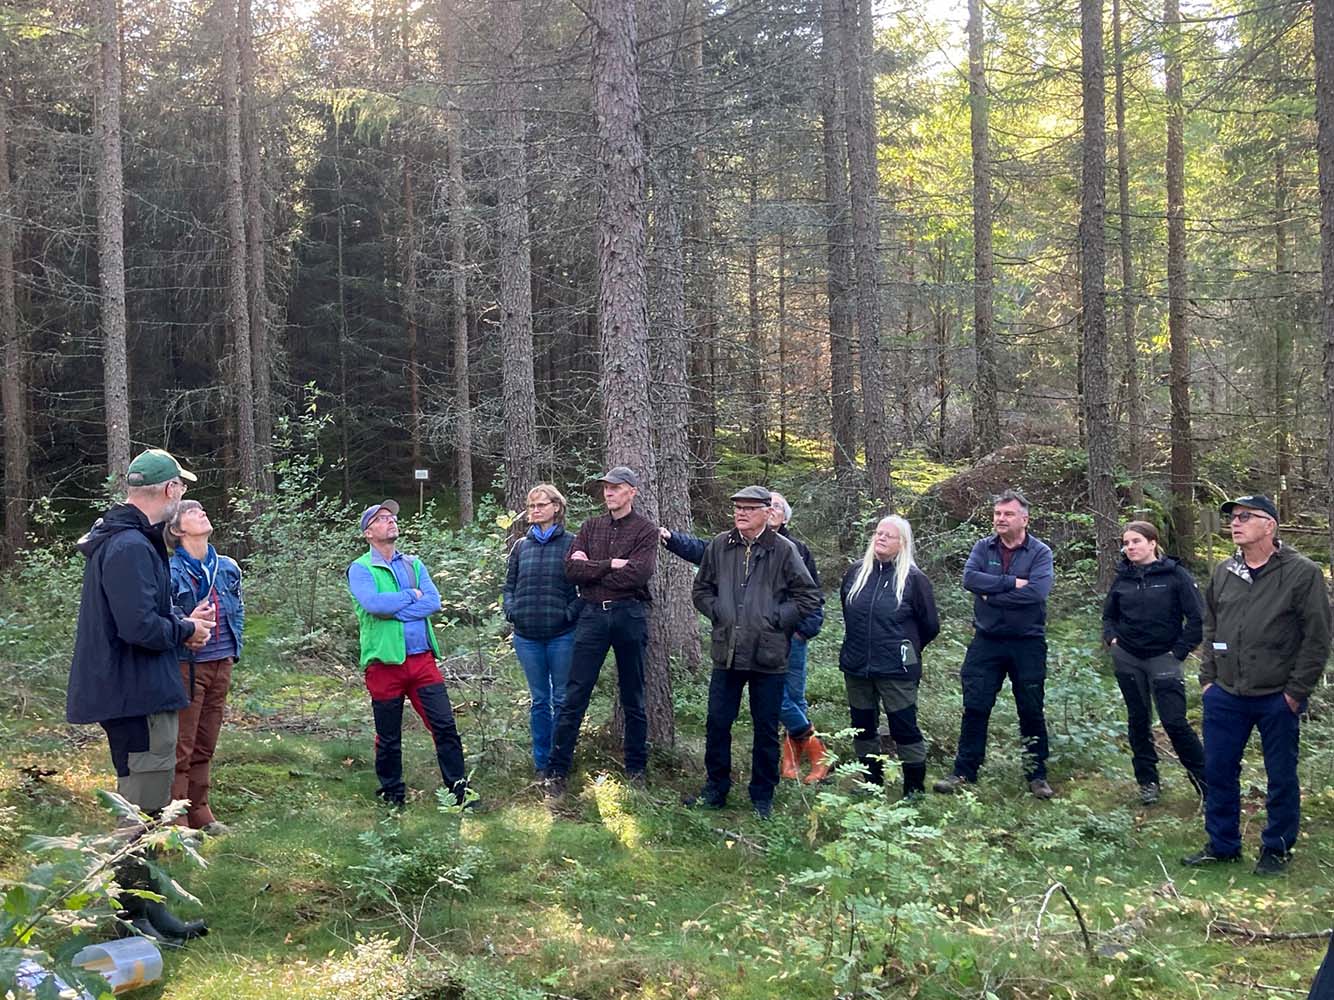 Mikael Andersson (on the left) is hosting one of the groups in a 29-year-old stand of Hybrid larch. Photo: Kristina Wallertz.